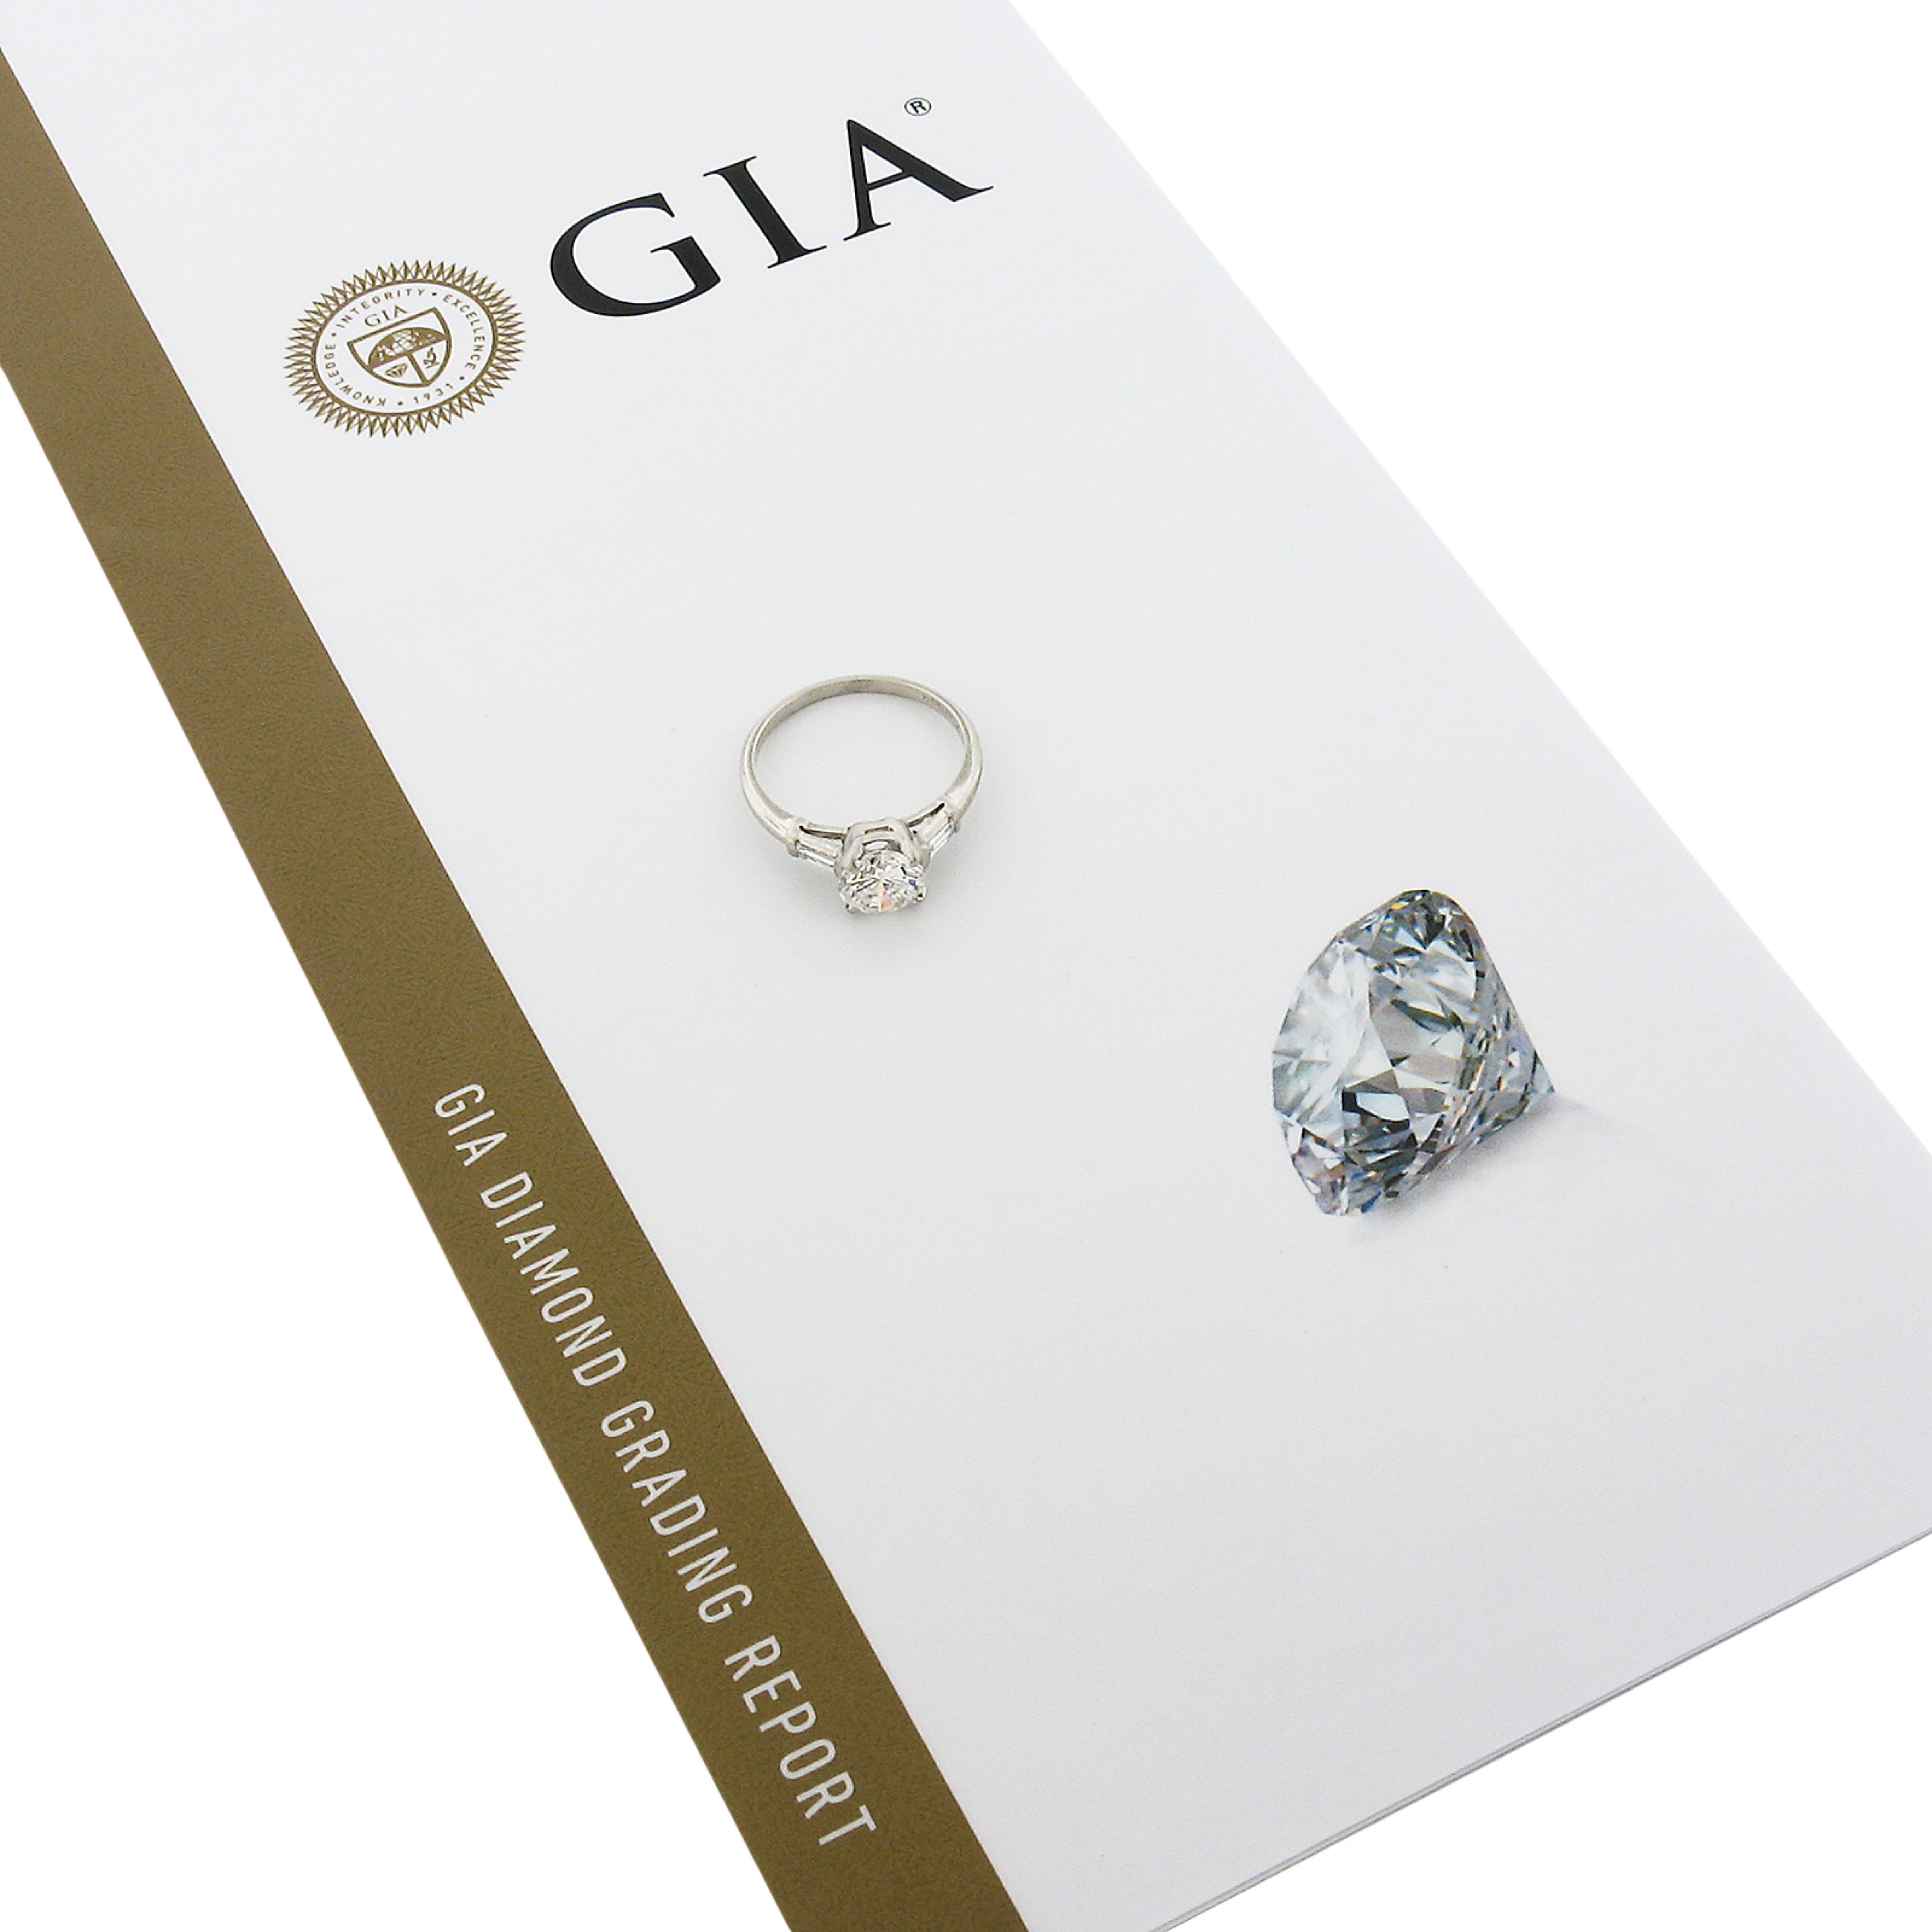 You are looking at a breathtaking, vintage, engagement style ring that was crafted from solid platinum. It features an absolutely incredible, GIA certified, round brilliant cut diamond solitaire neatly set with sturdy prongs at its center and is